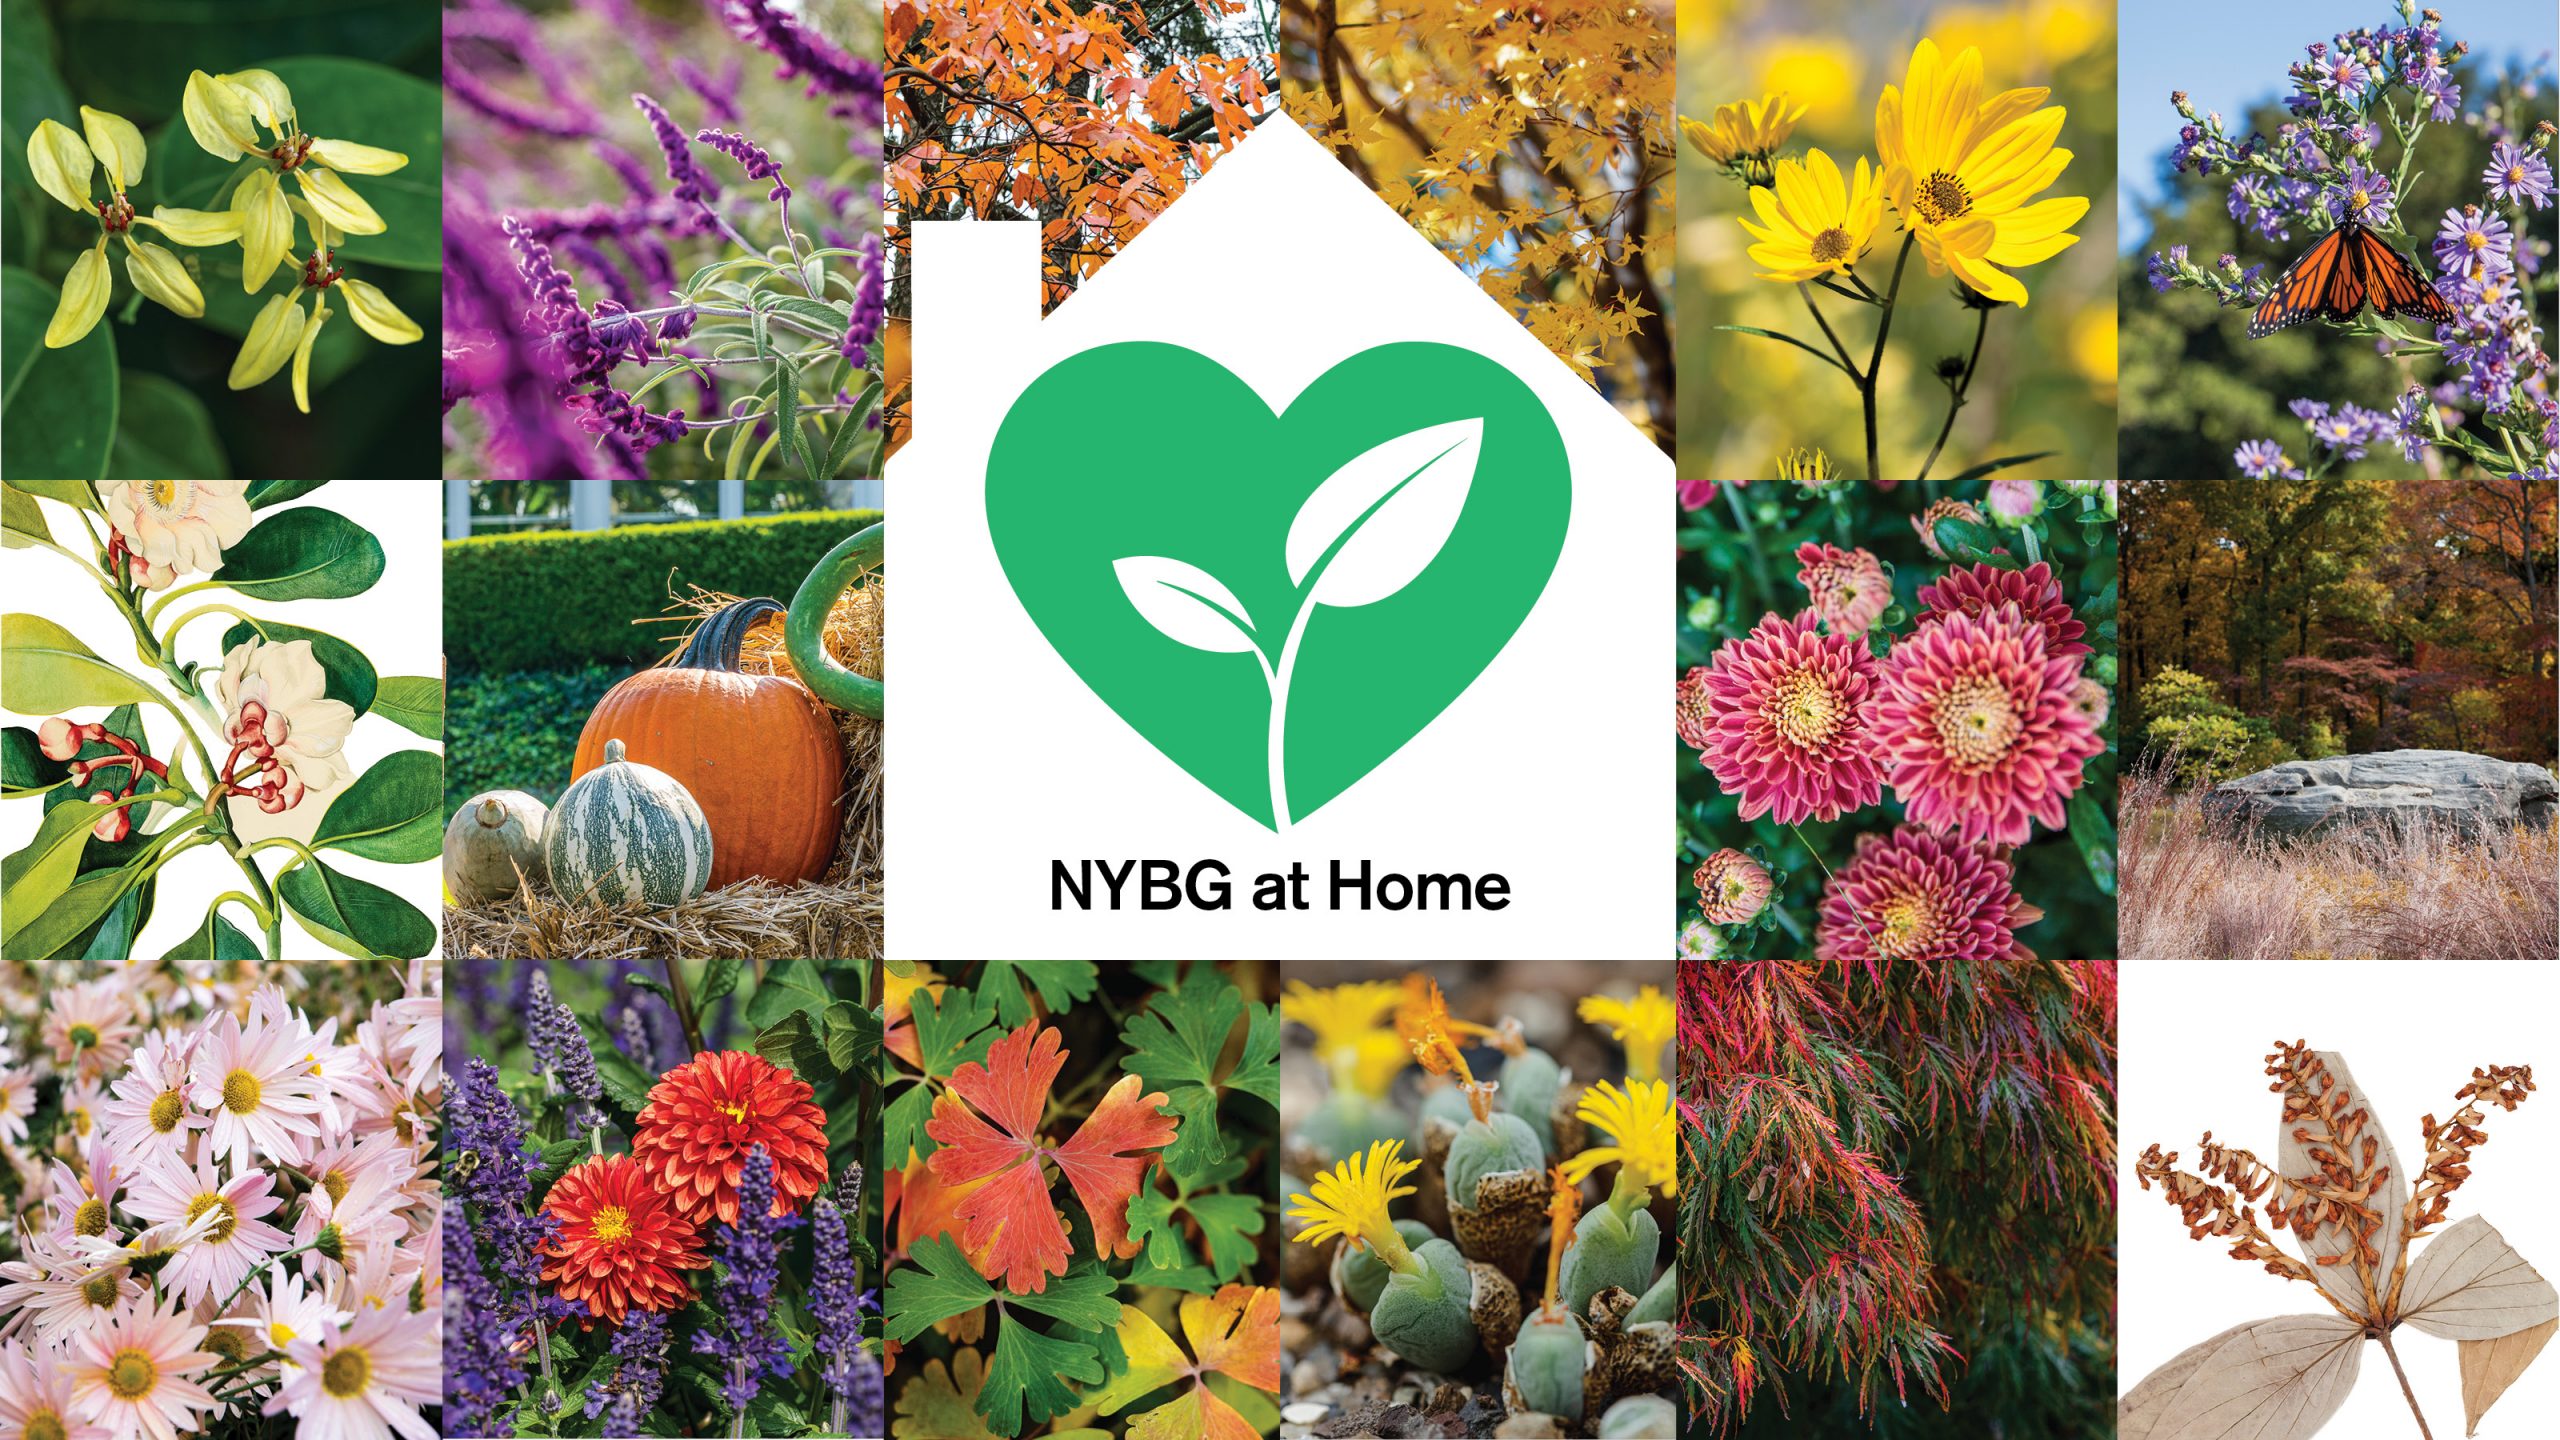 Collage of colorful plant and flower images in squares with the NYBG at Home logo green heart in a white house siloutte in the middle